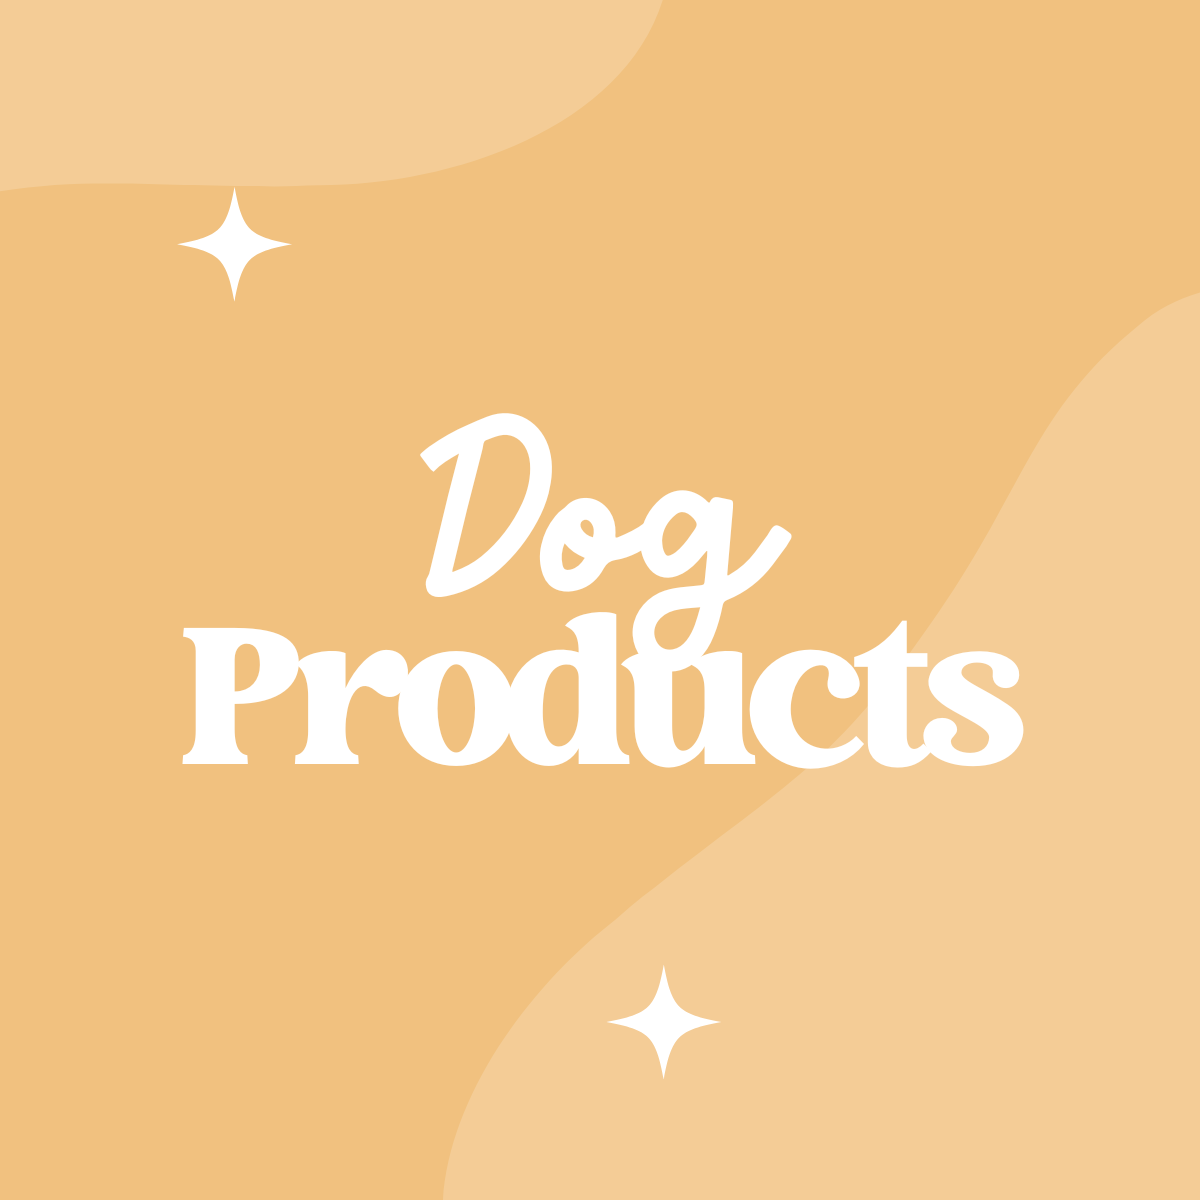 All Dog Products